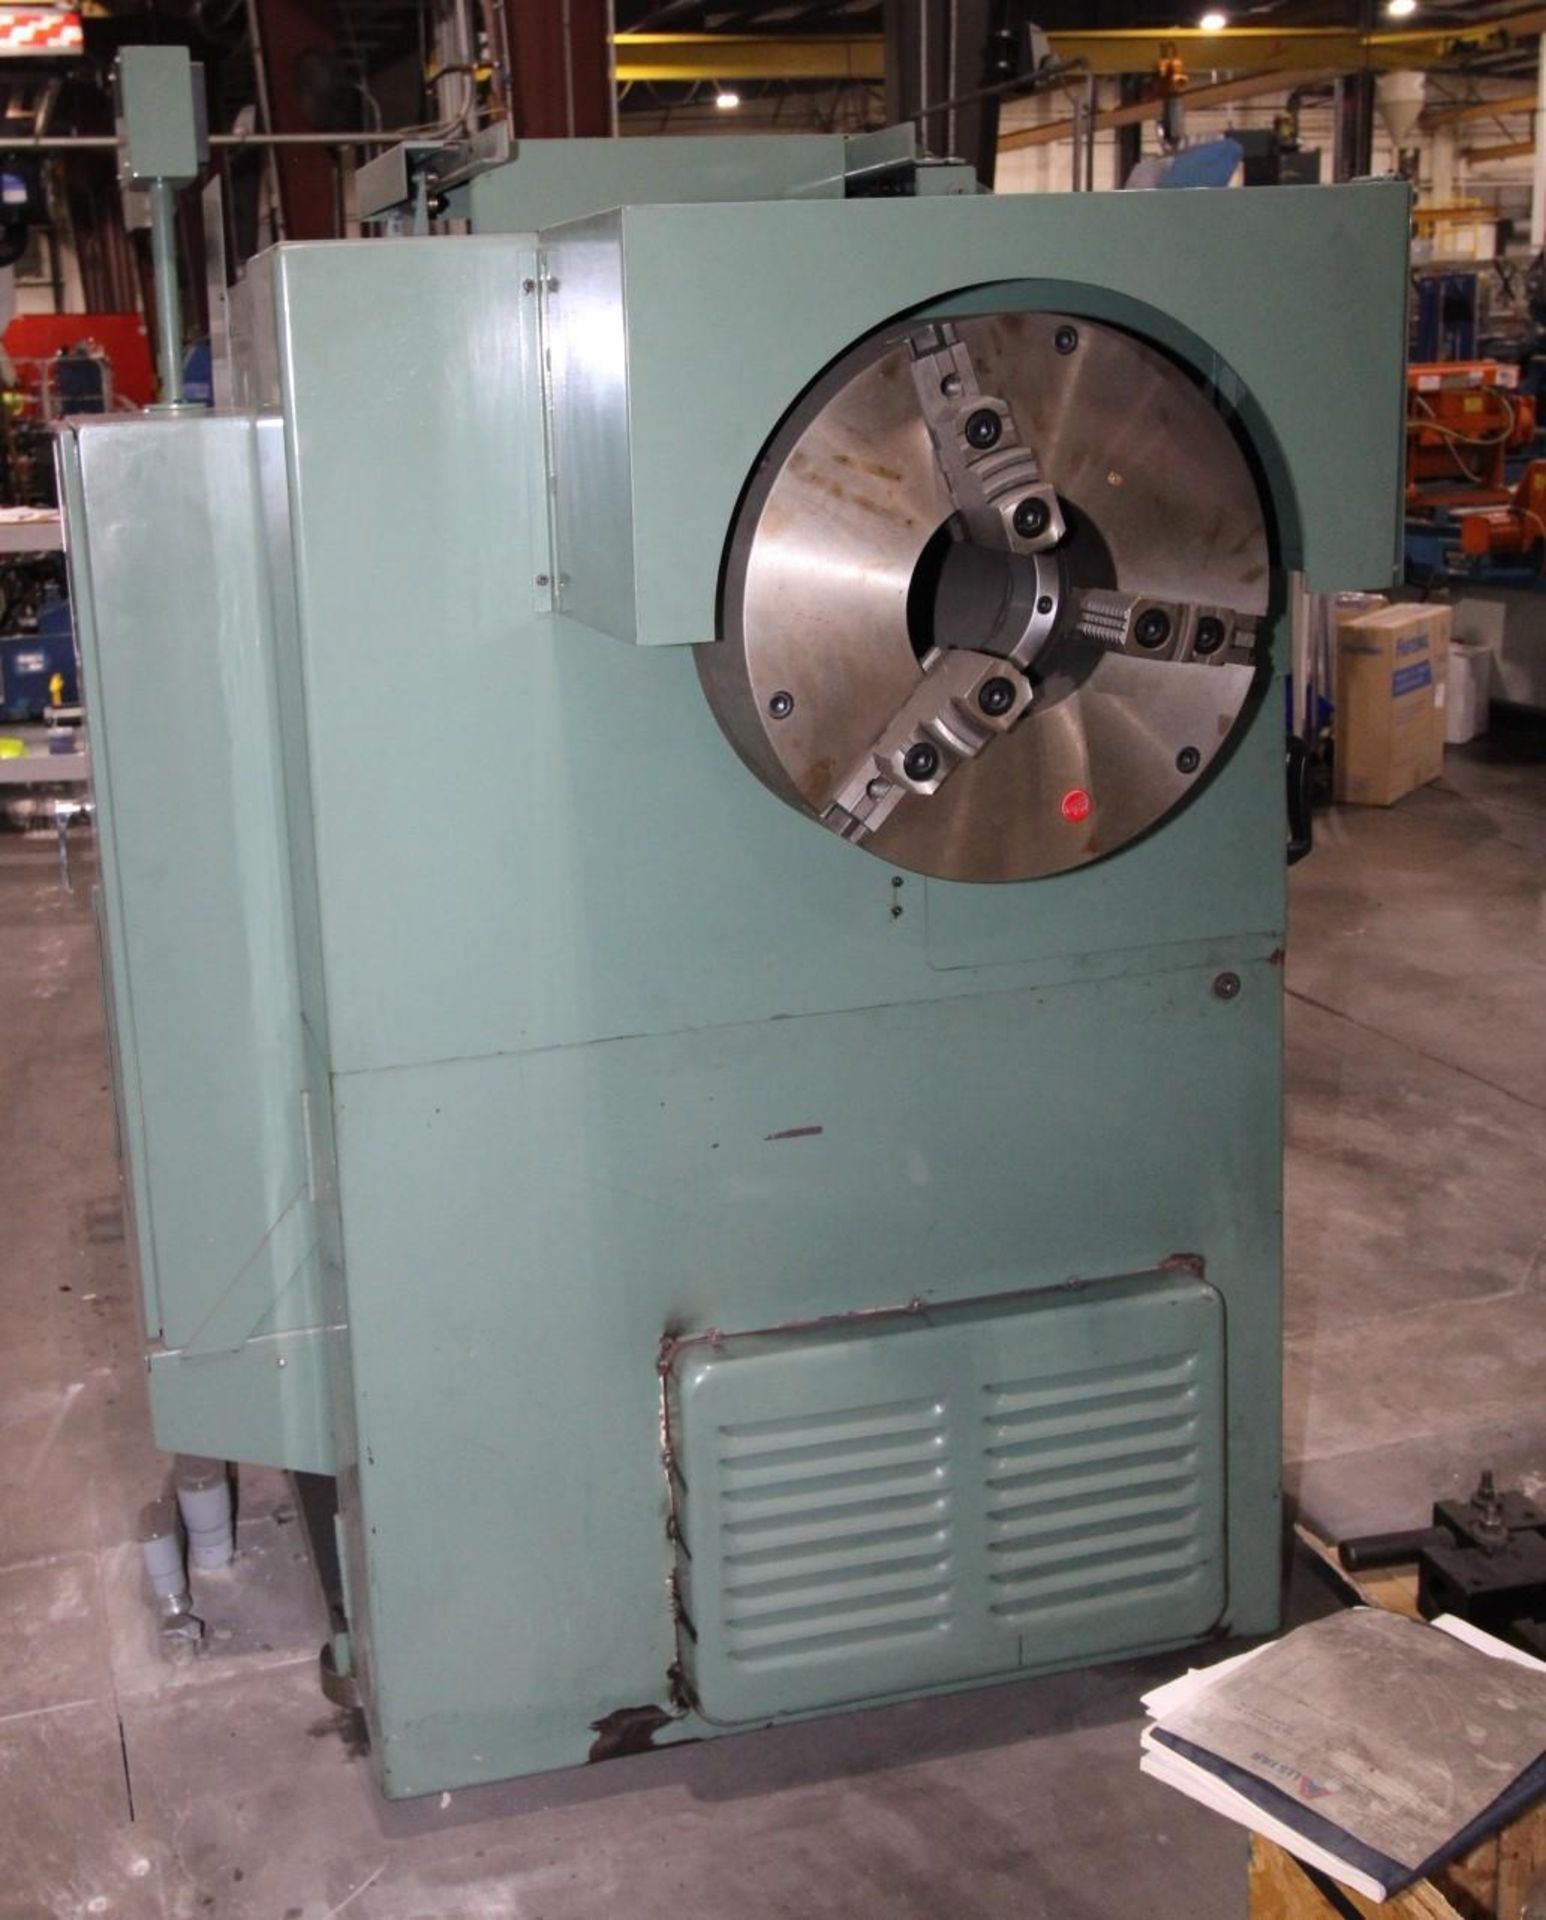 HOLLOW SPINDLE LATHE, KINGSTON HEAVY DUTY 34 HP-2000, new 2014, never used in production, 7-1/4" sp - Image 3 of 23